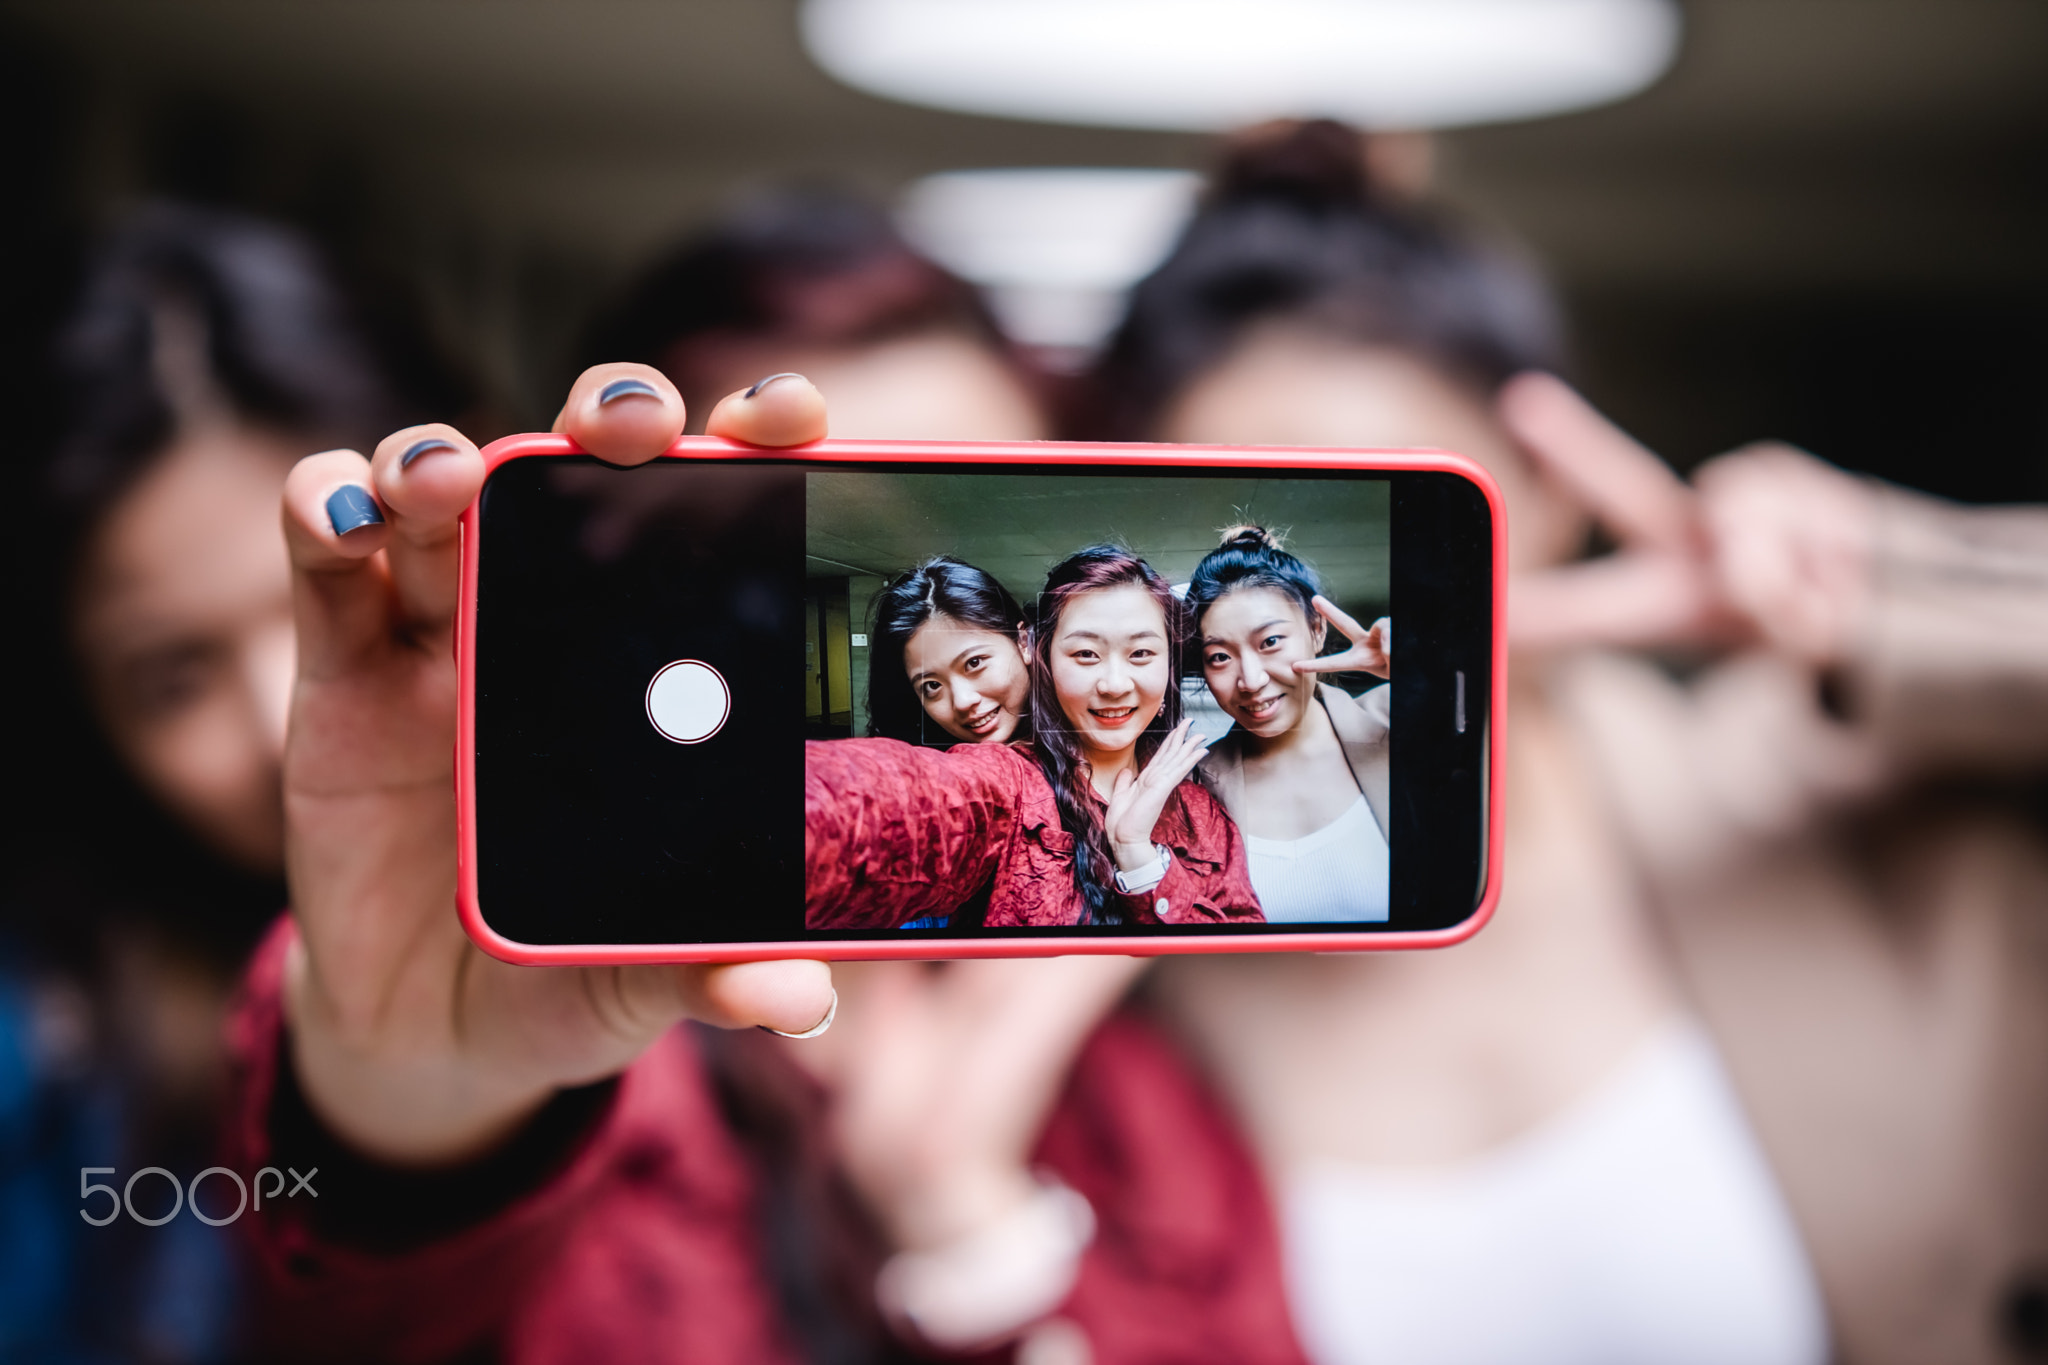 Group of female friends taking a selfie together with a mobile phone